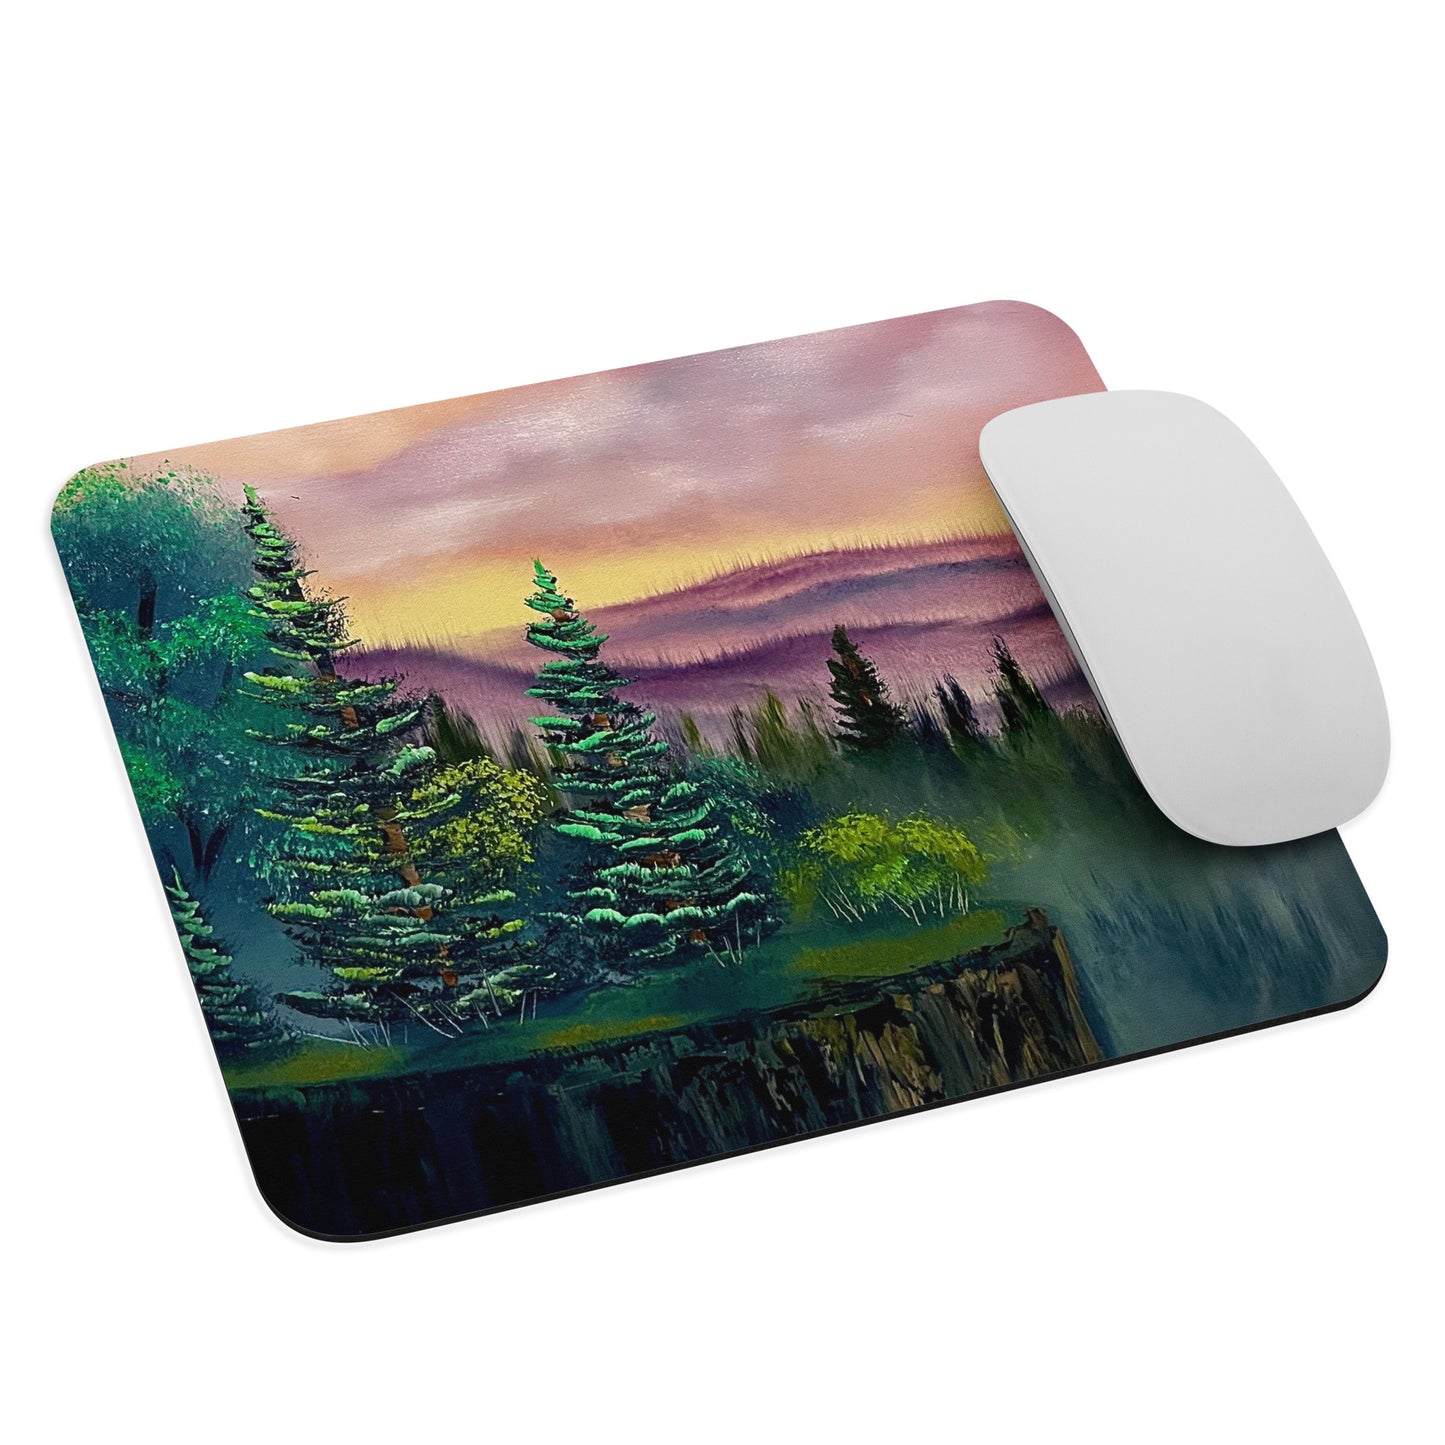 Mouse Pad - Smokey Mountains Landscape by Paint With Josh